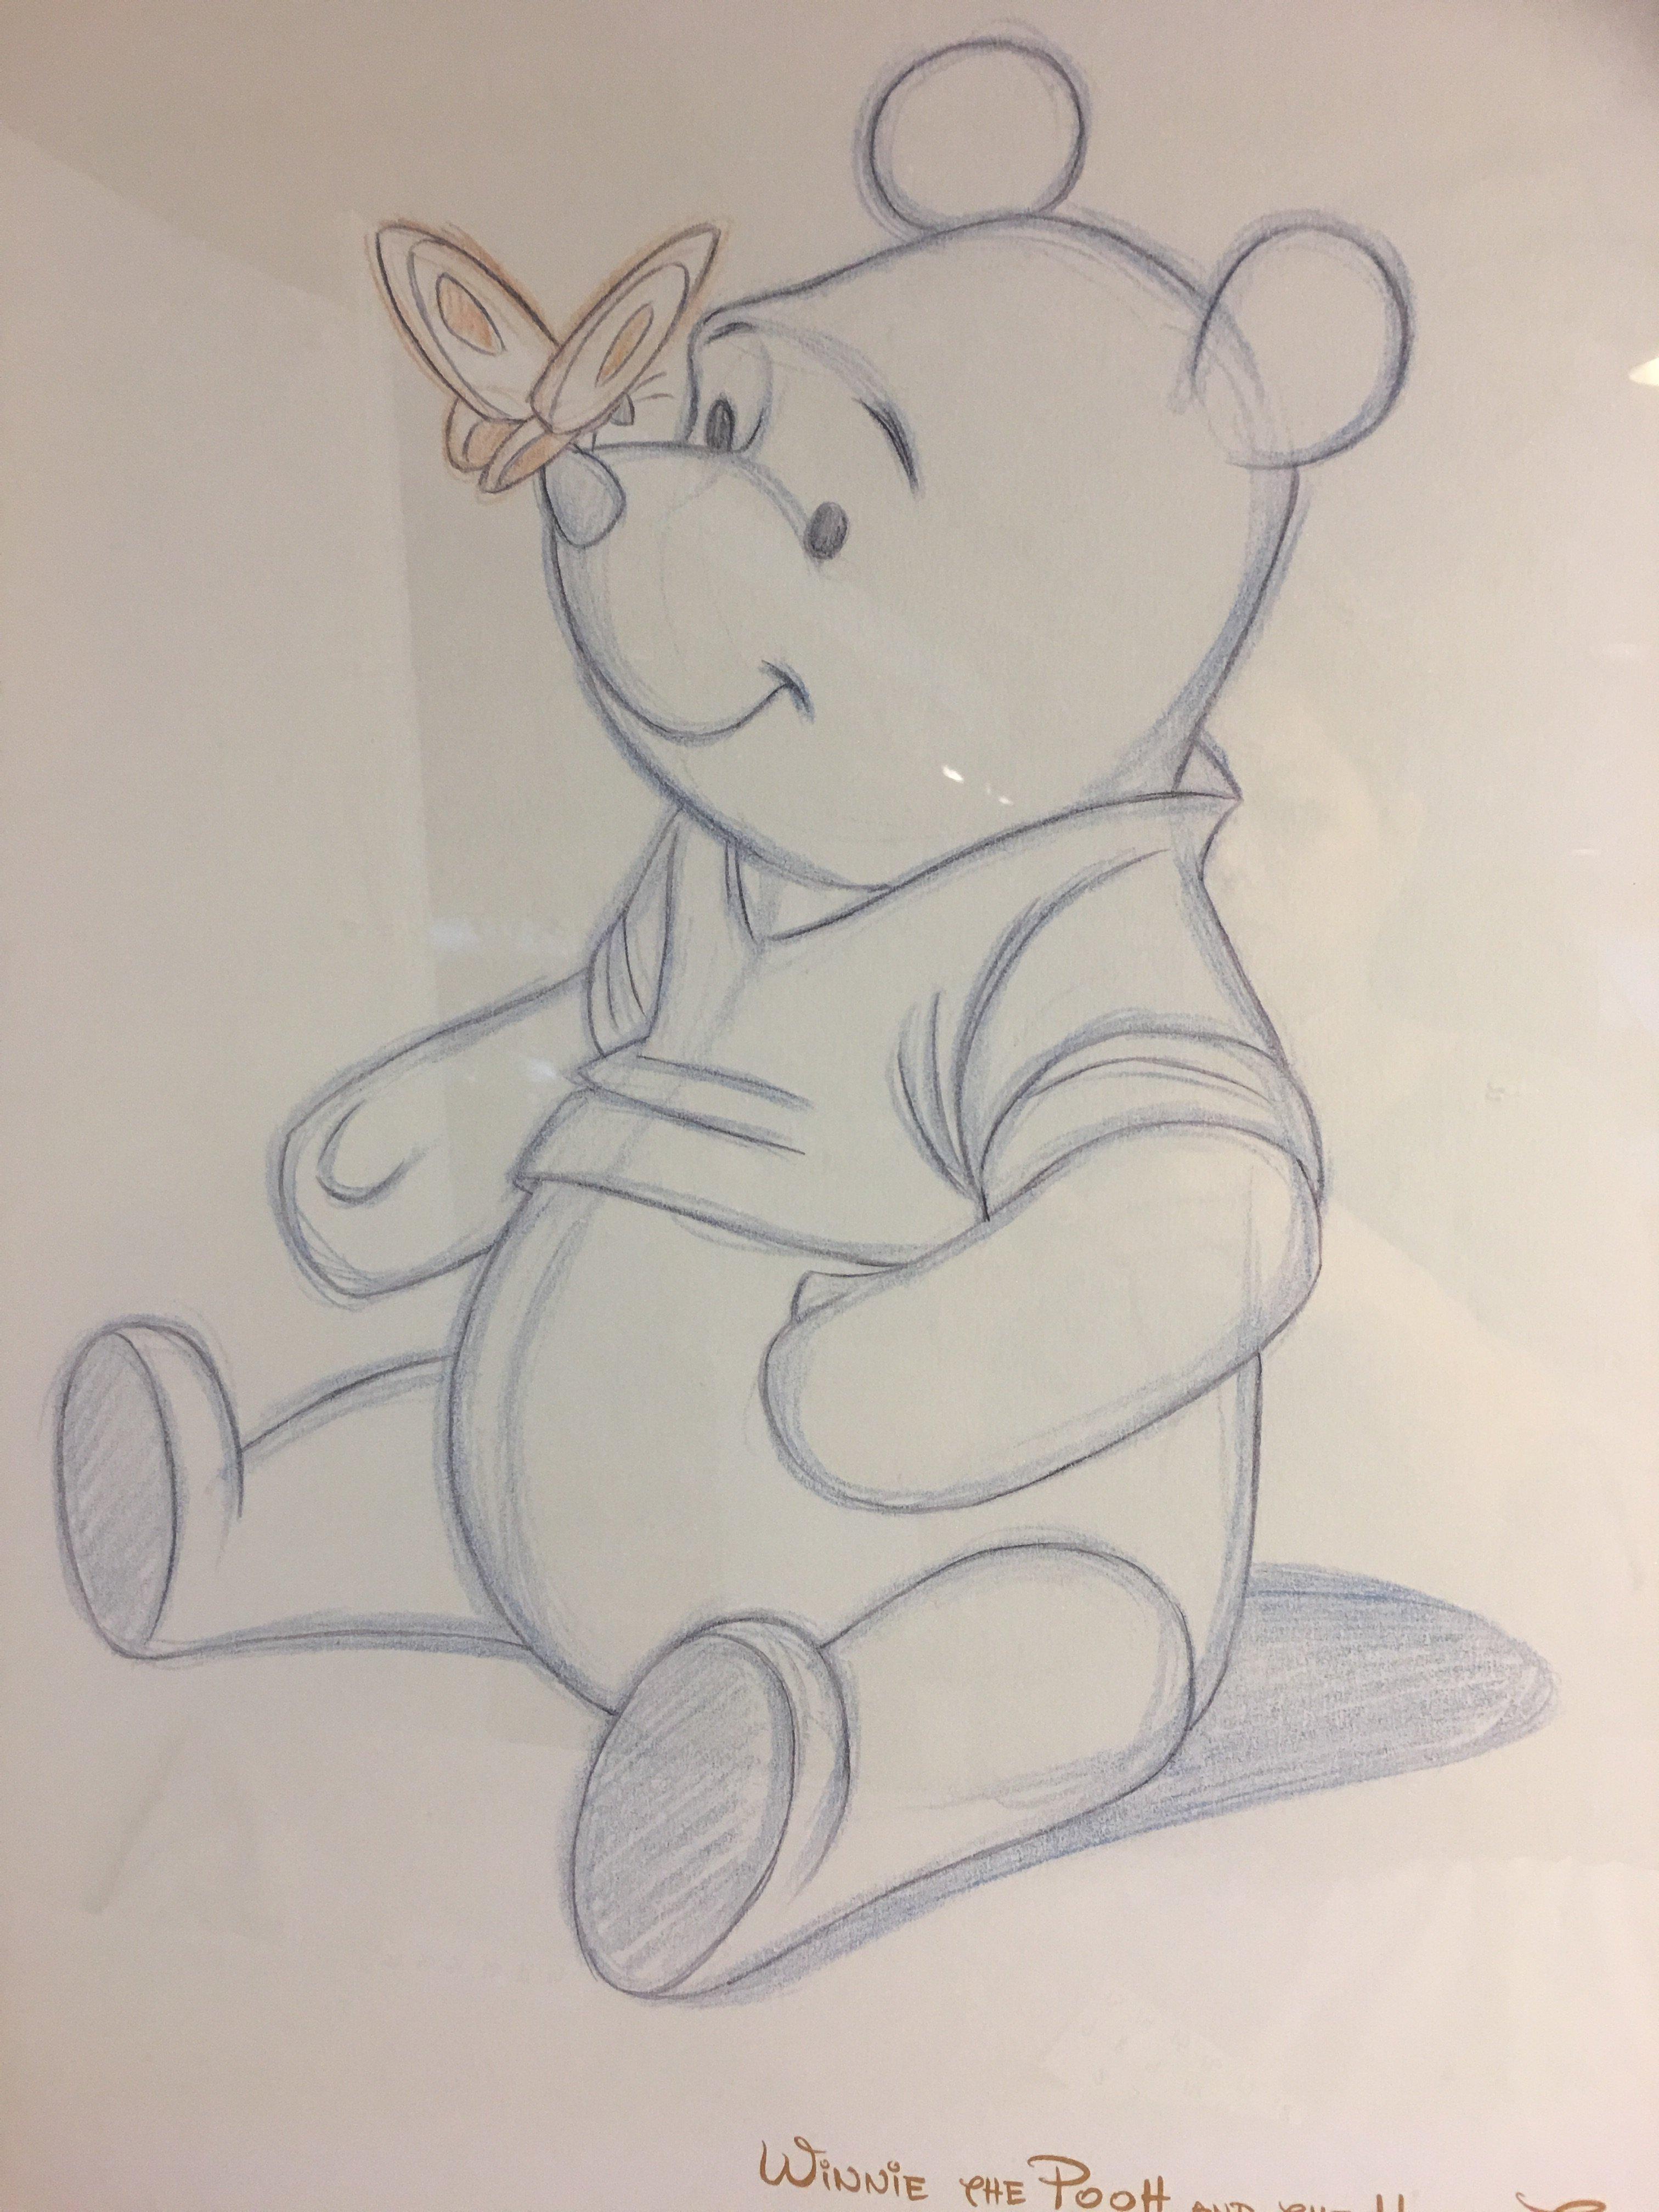 The Walt Disney " Winnie the Pooh and The Honey Tree 1966 Sketch Framed Size:35"Tall by 25"Width